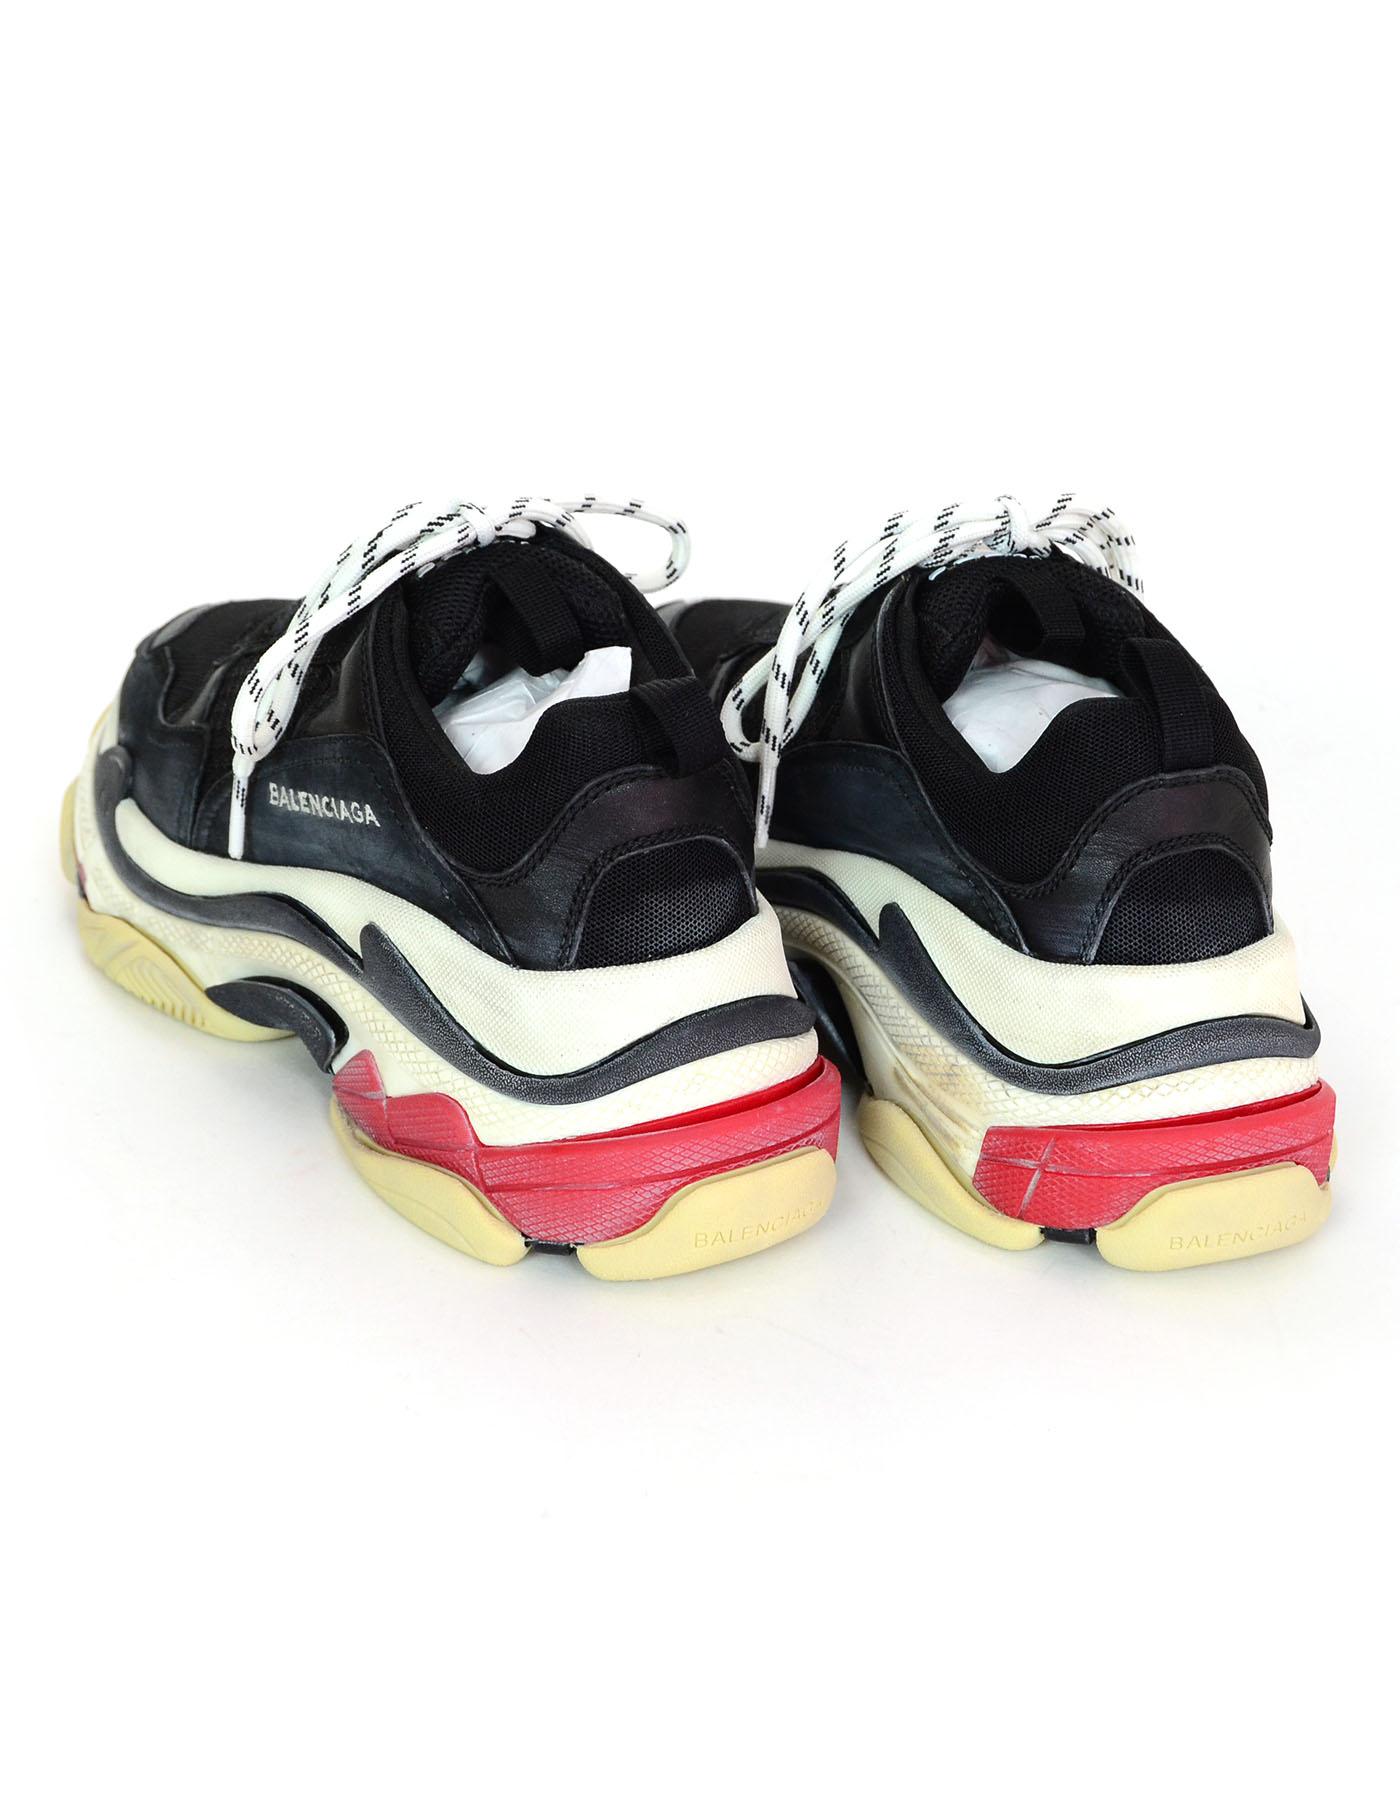 Balenciaga Black/Red/White Triple S Trainers sz 39 w. Box & Extra Laces In Excellent Condition In New York, NY